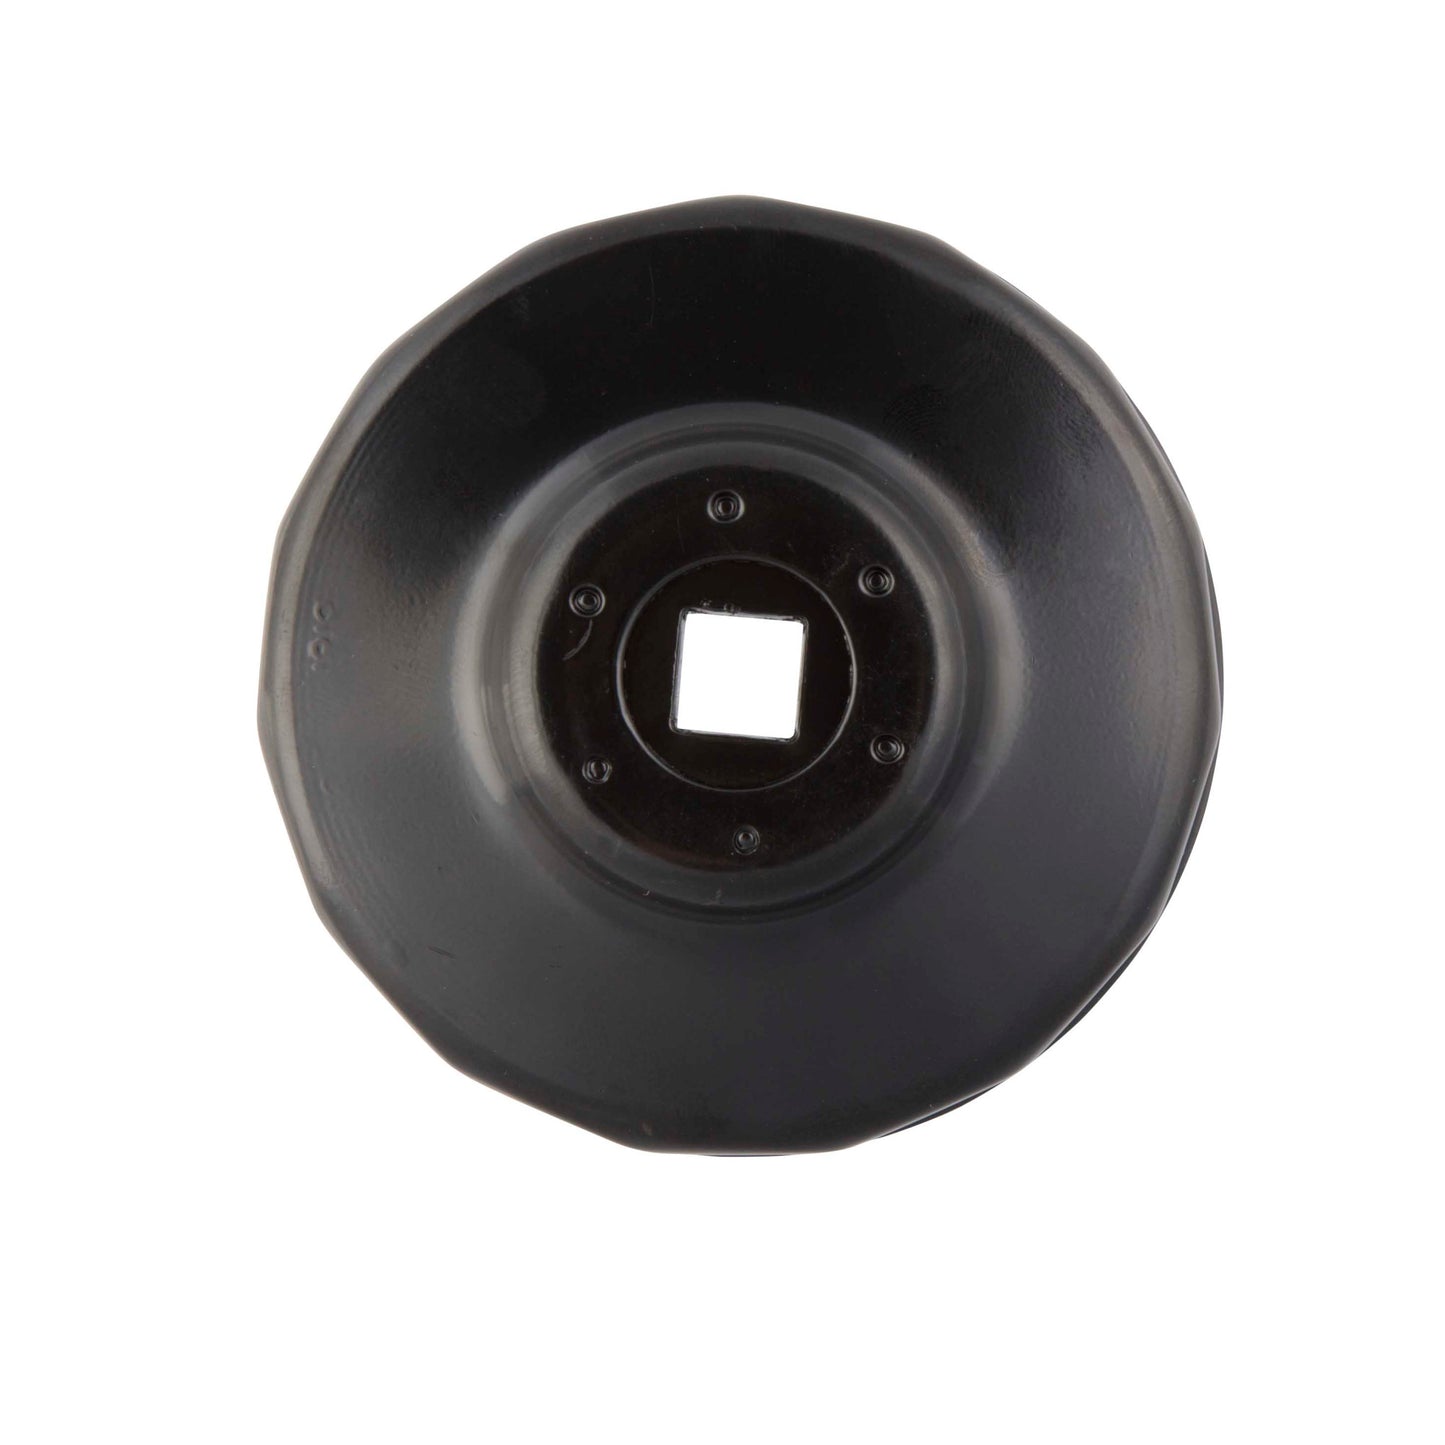 Oil Filter Cap Wrench 80mm x 15 Flute